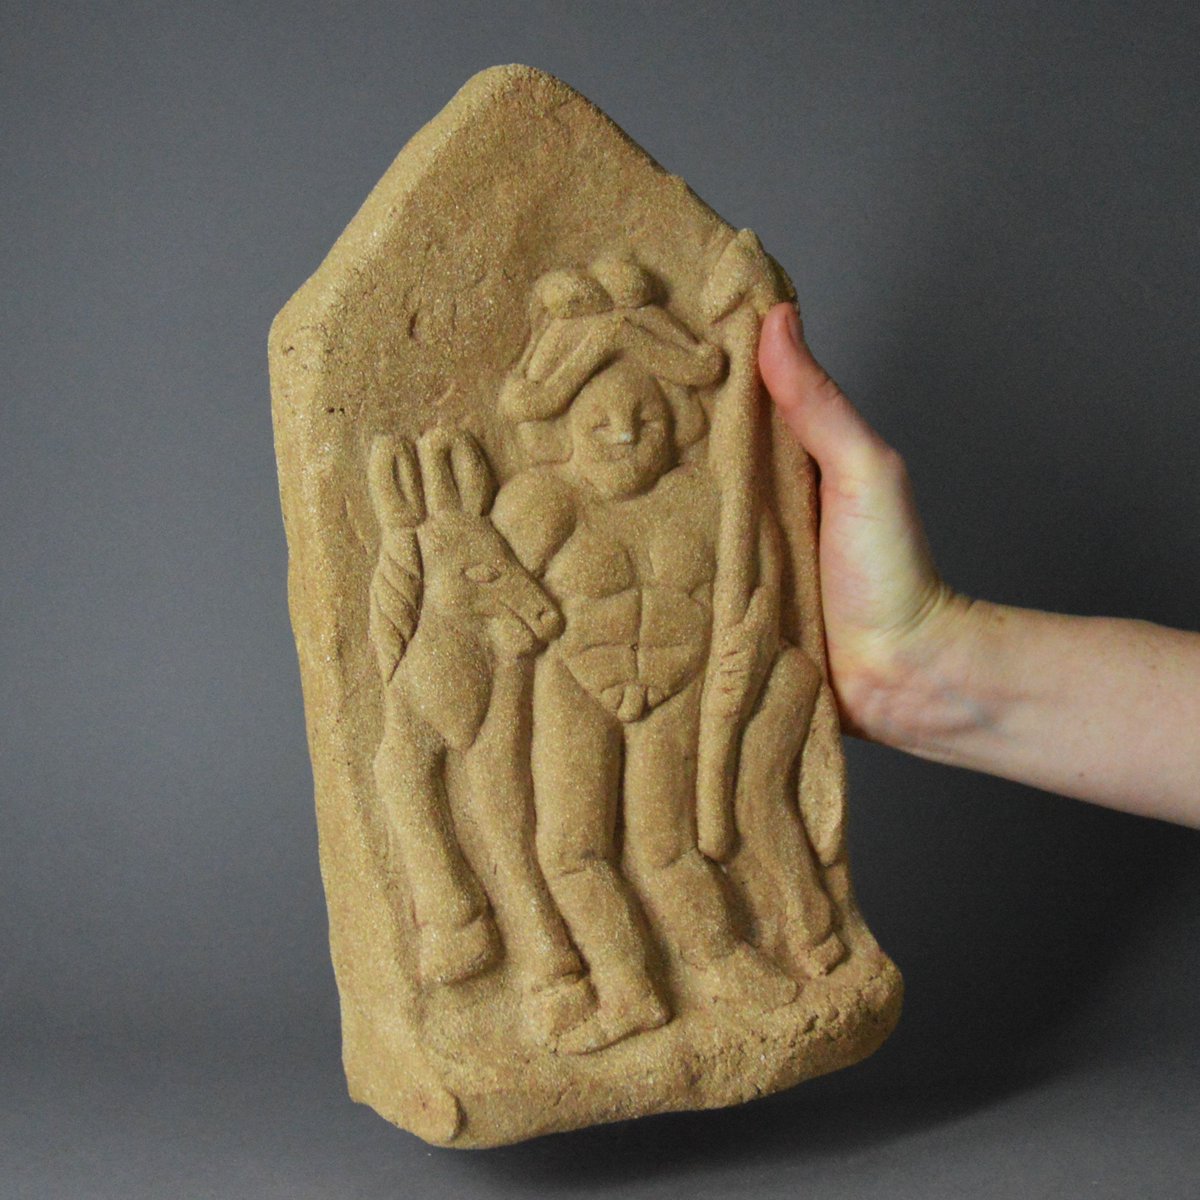 Who does the fascinating cavalry altar discovered at Vindolanda Roman Fort depict? Soldiers in fourth-century barracks may have merged two deities to create their own God for guidance and protection. Get yours now buff.ly/3121KCt